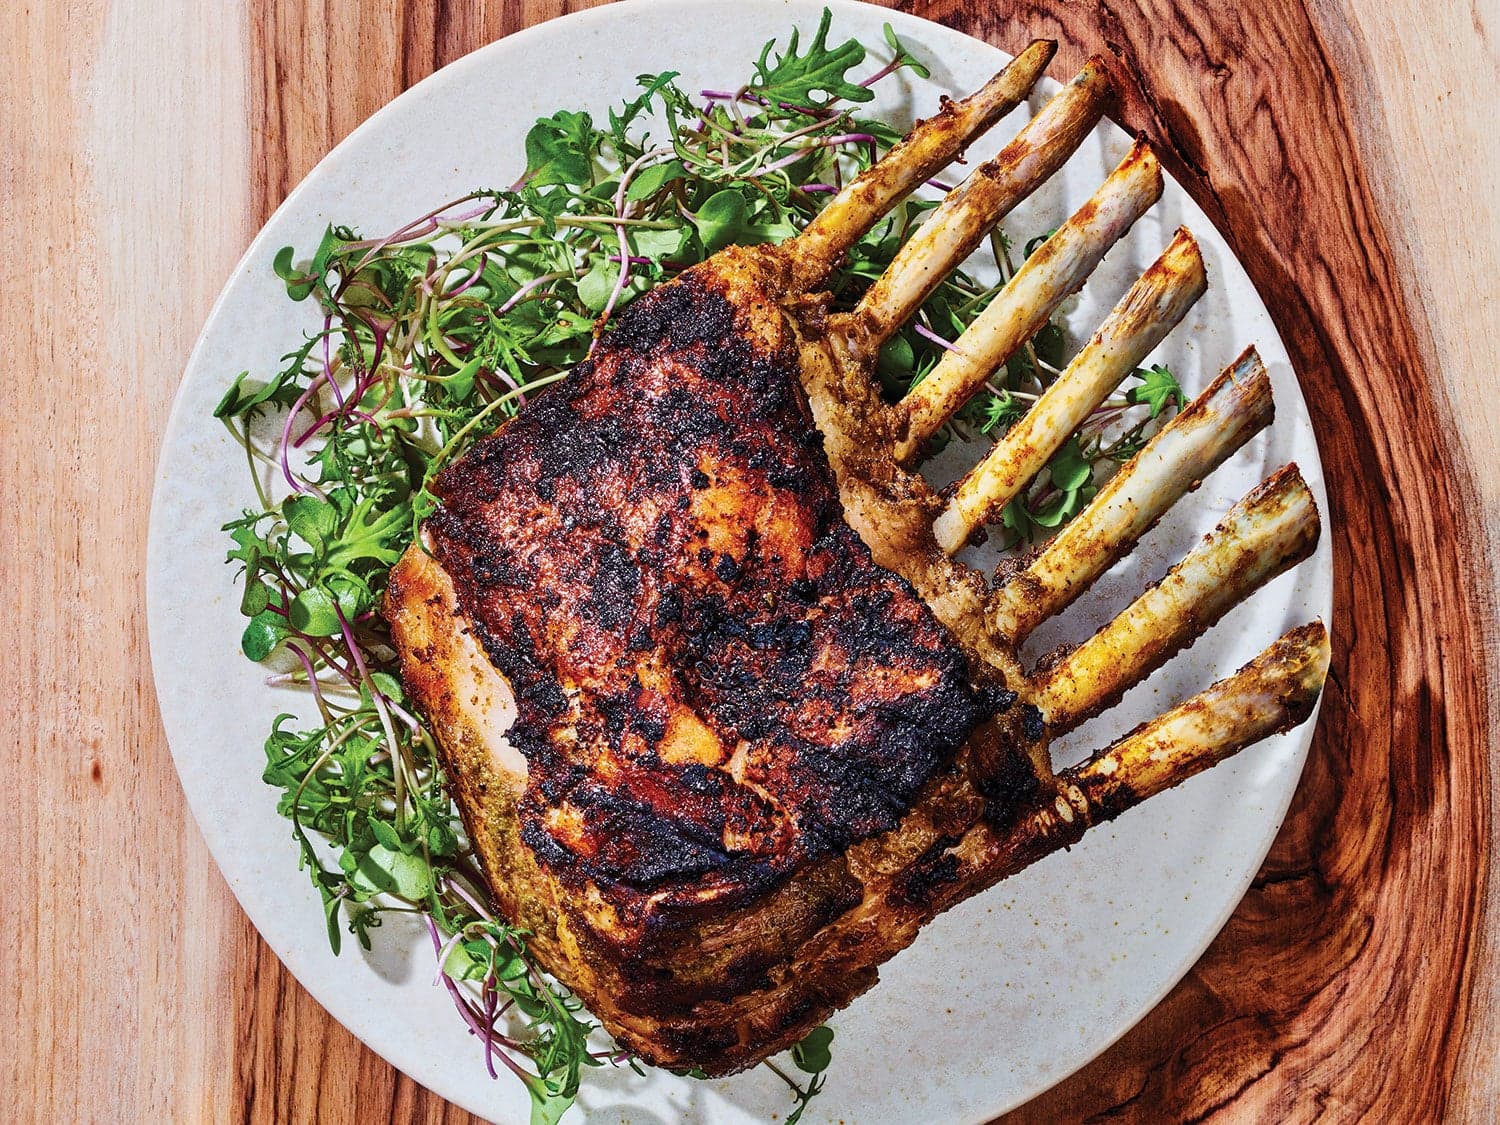 Grilled Rack of Lamb with Garlic and Herbs